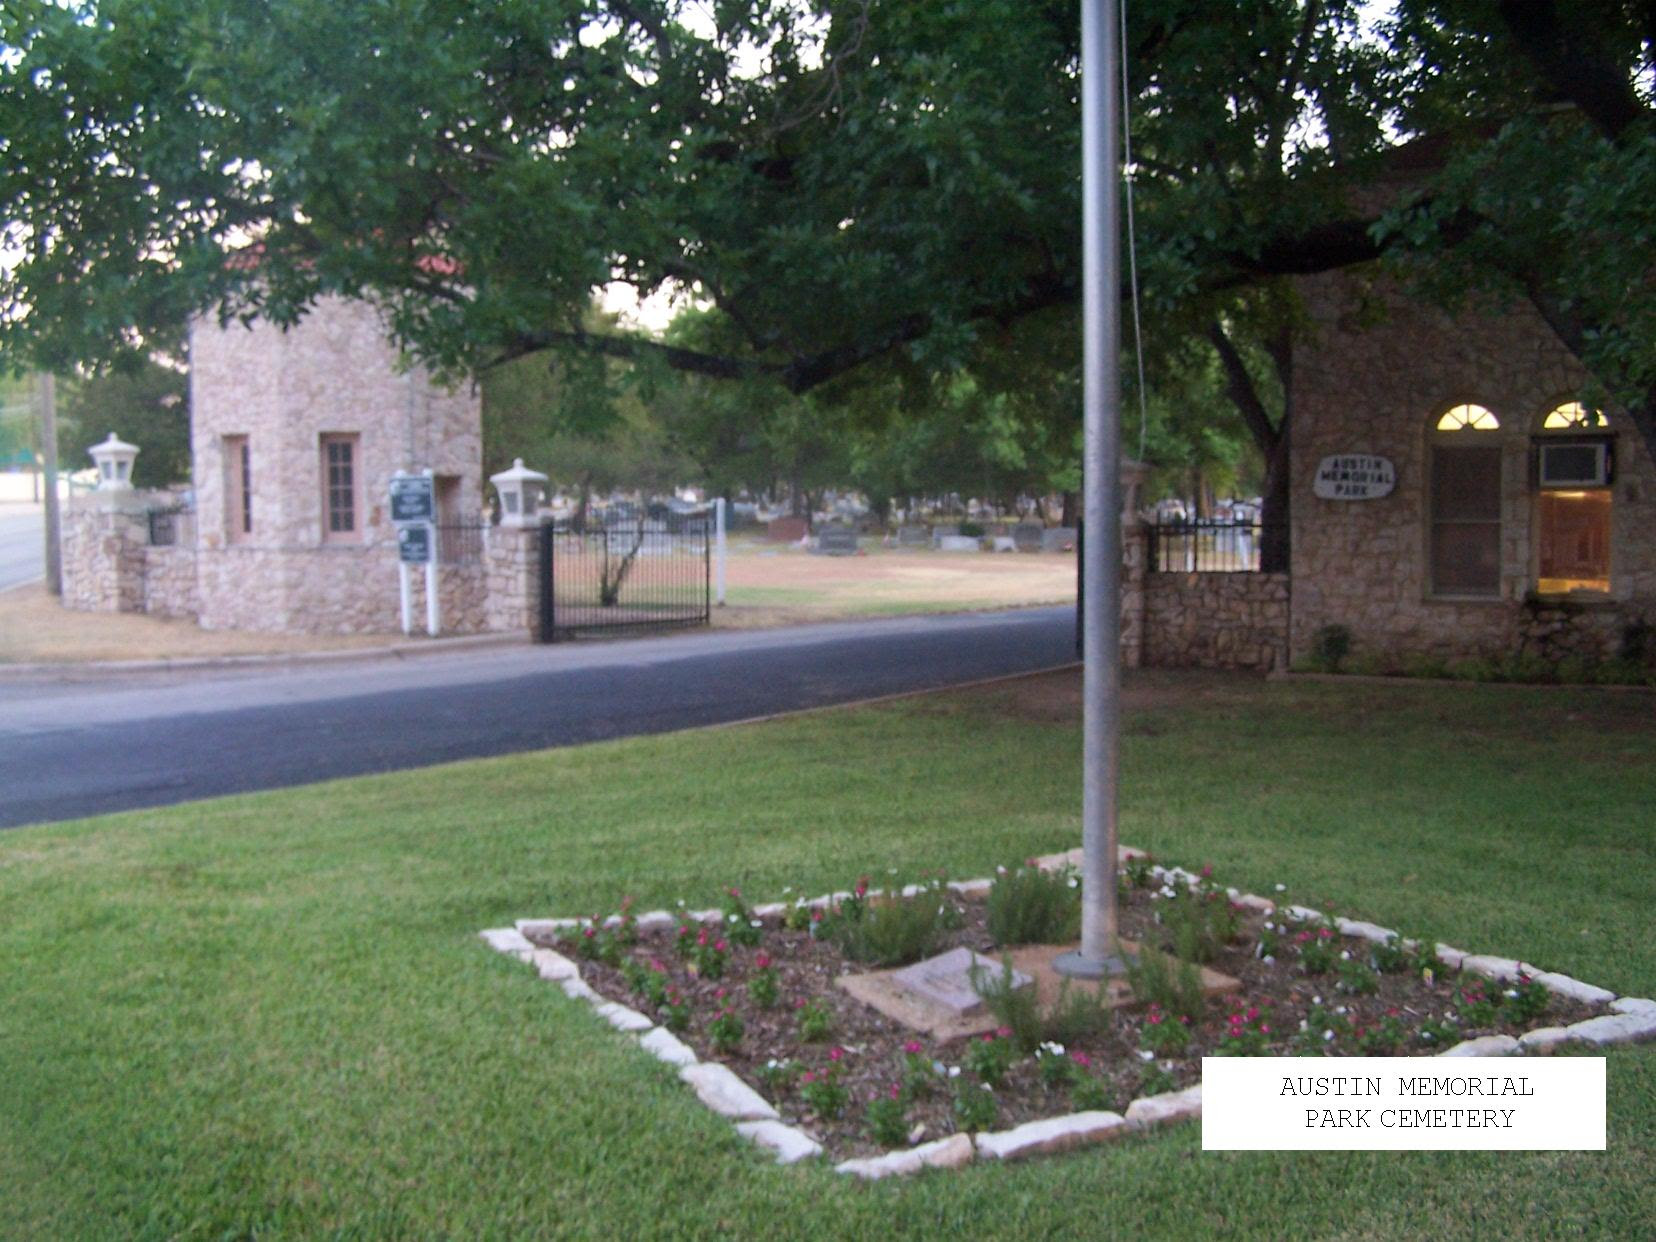 The City of Austin is updating its master plan for the city's cemeteries.